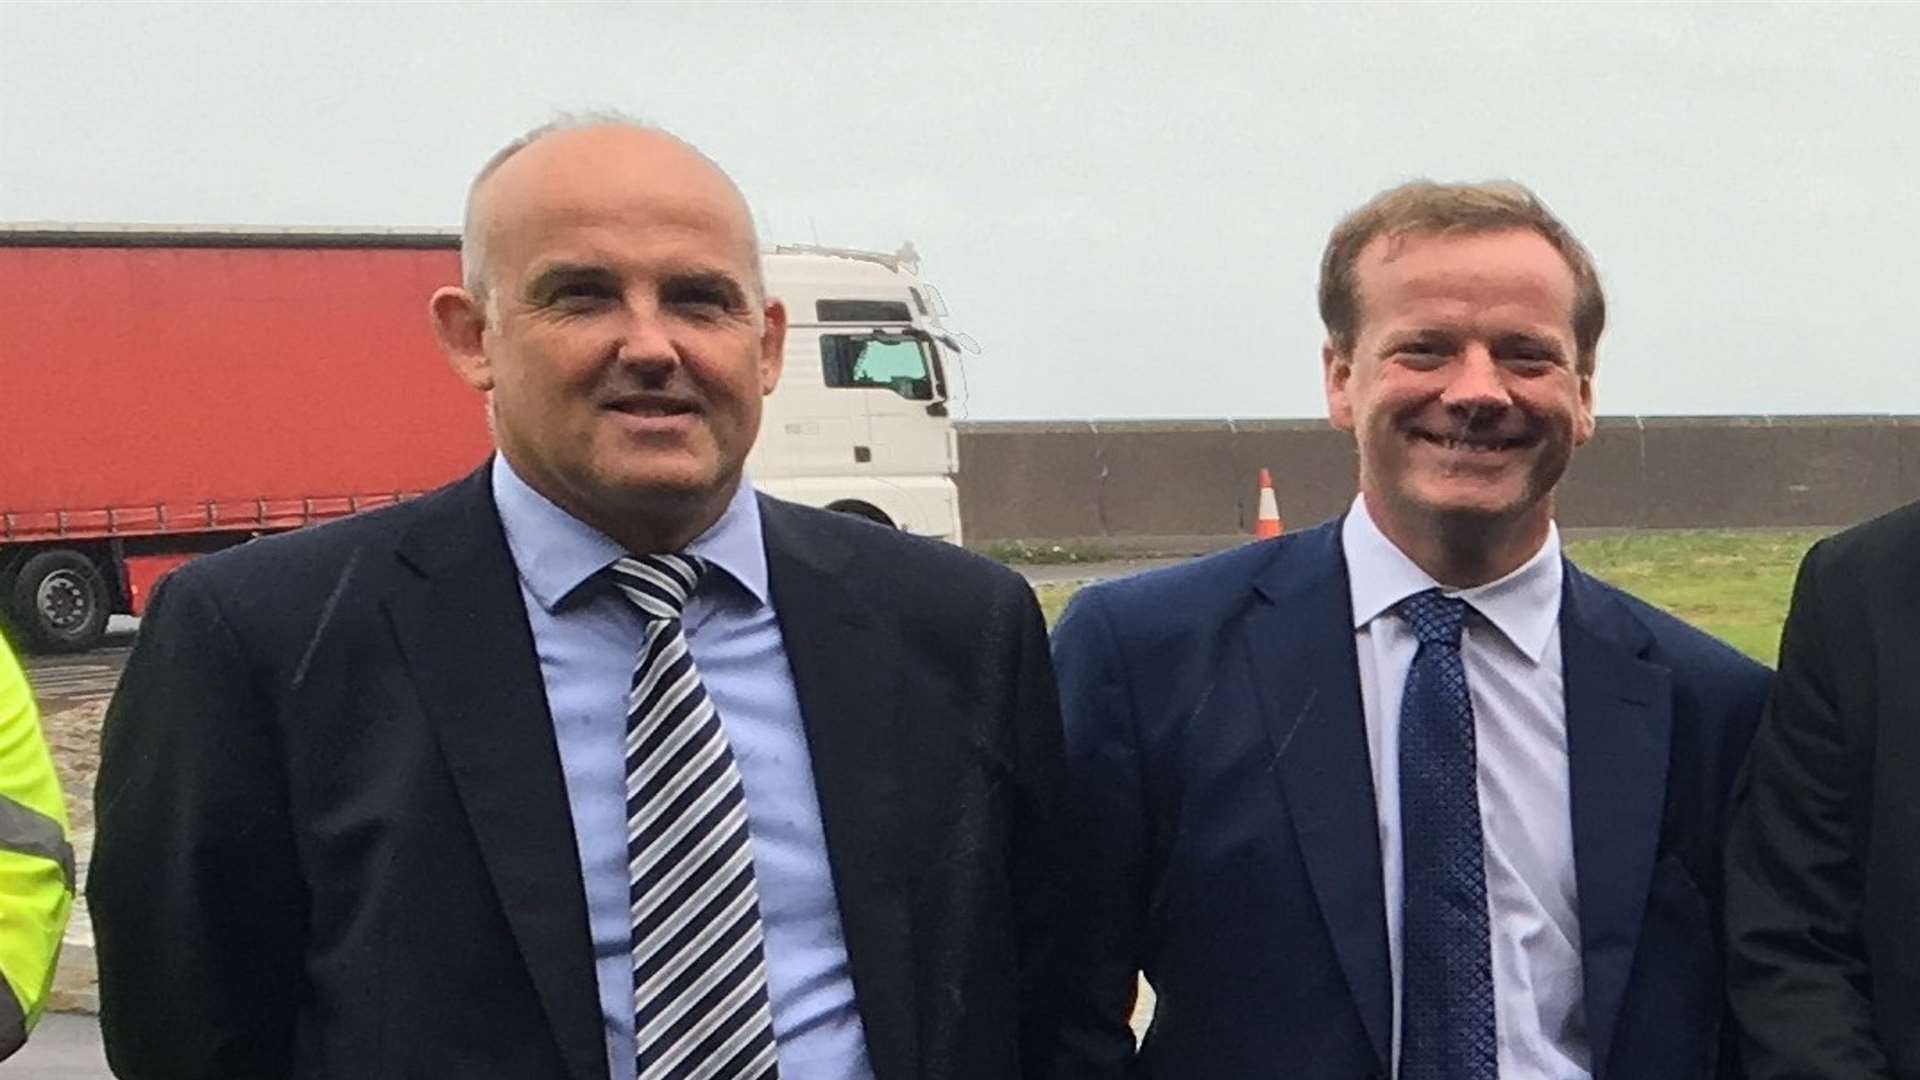 Dover MP Charlie Elphicke (right) with Simon Jones of Highways England